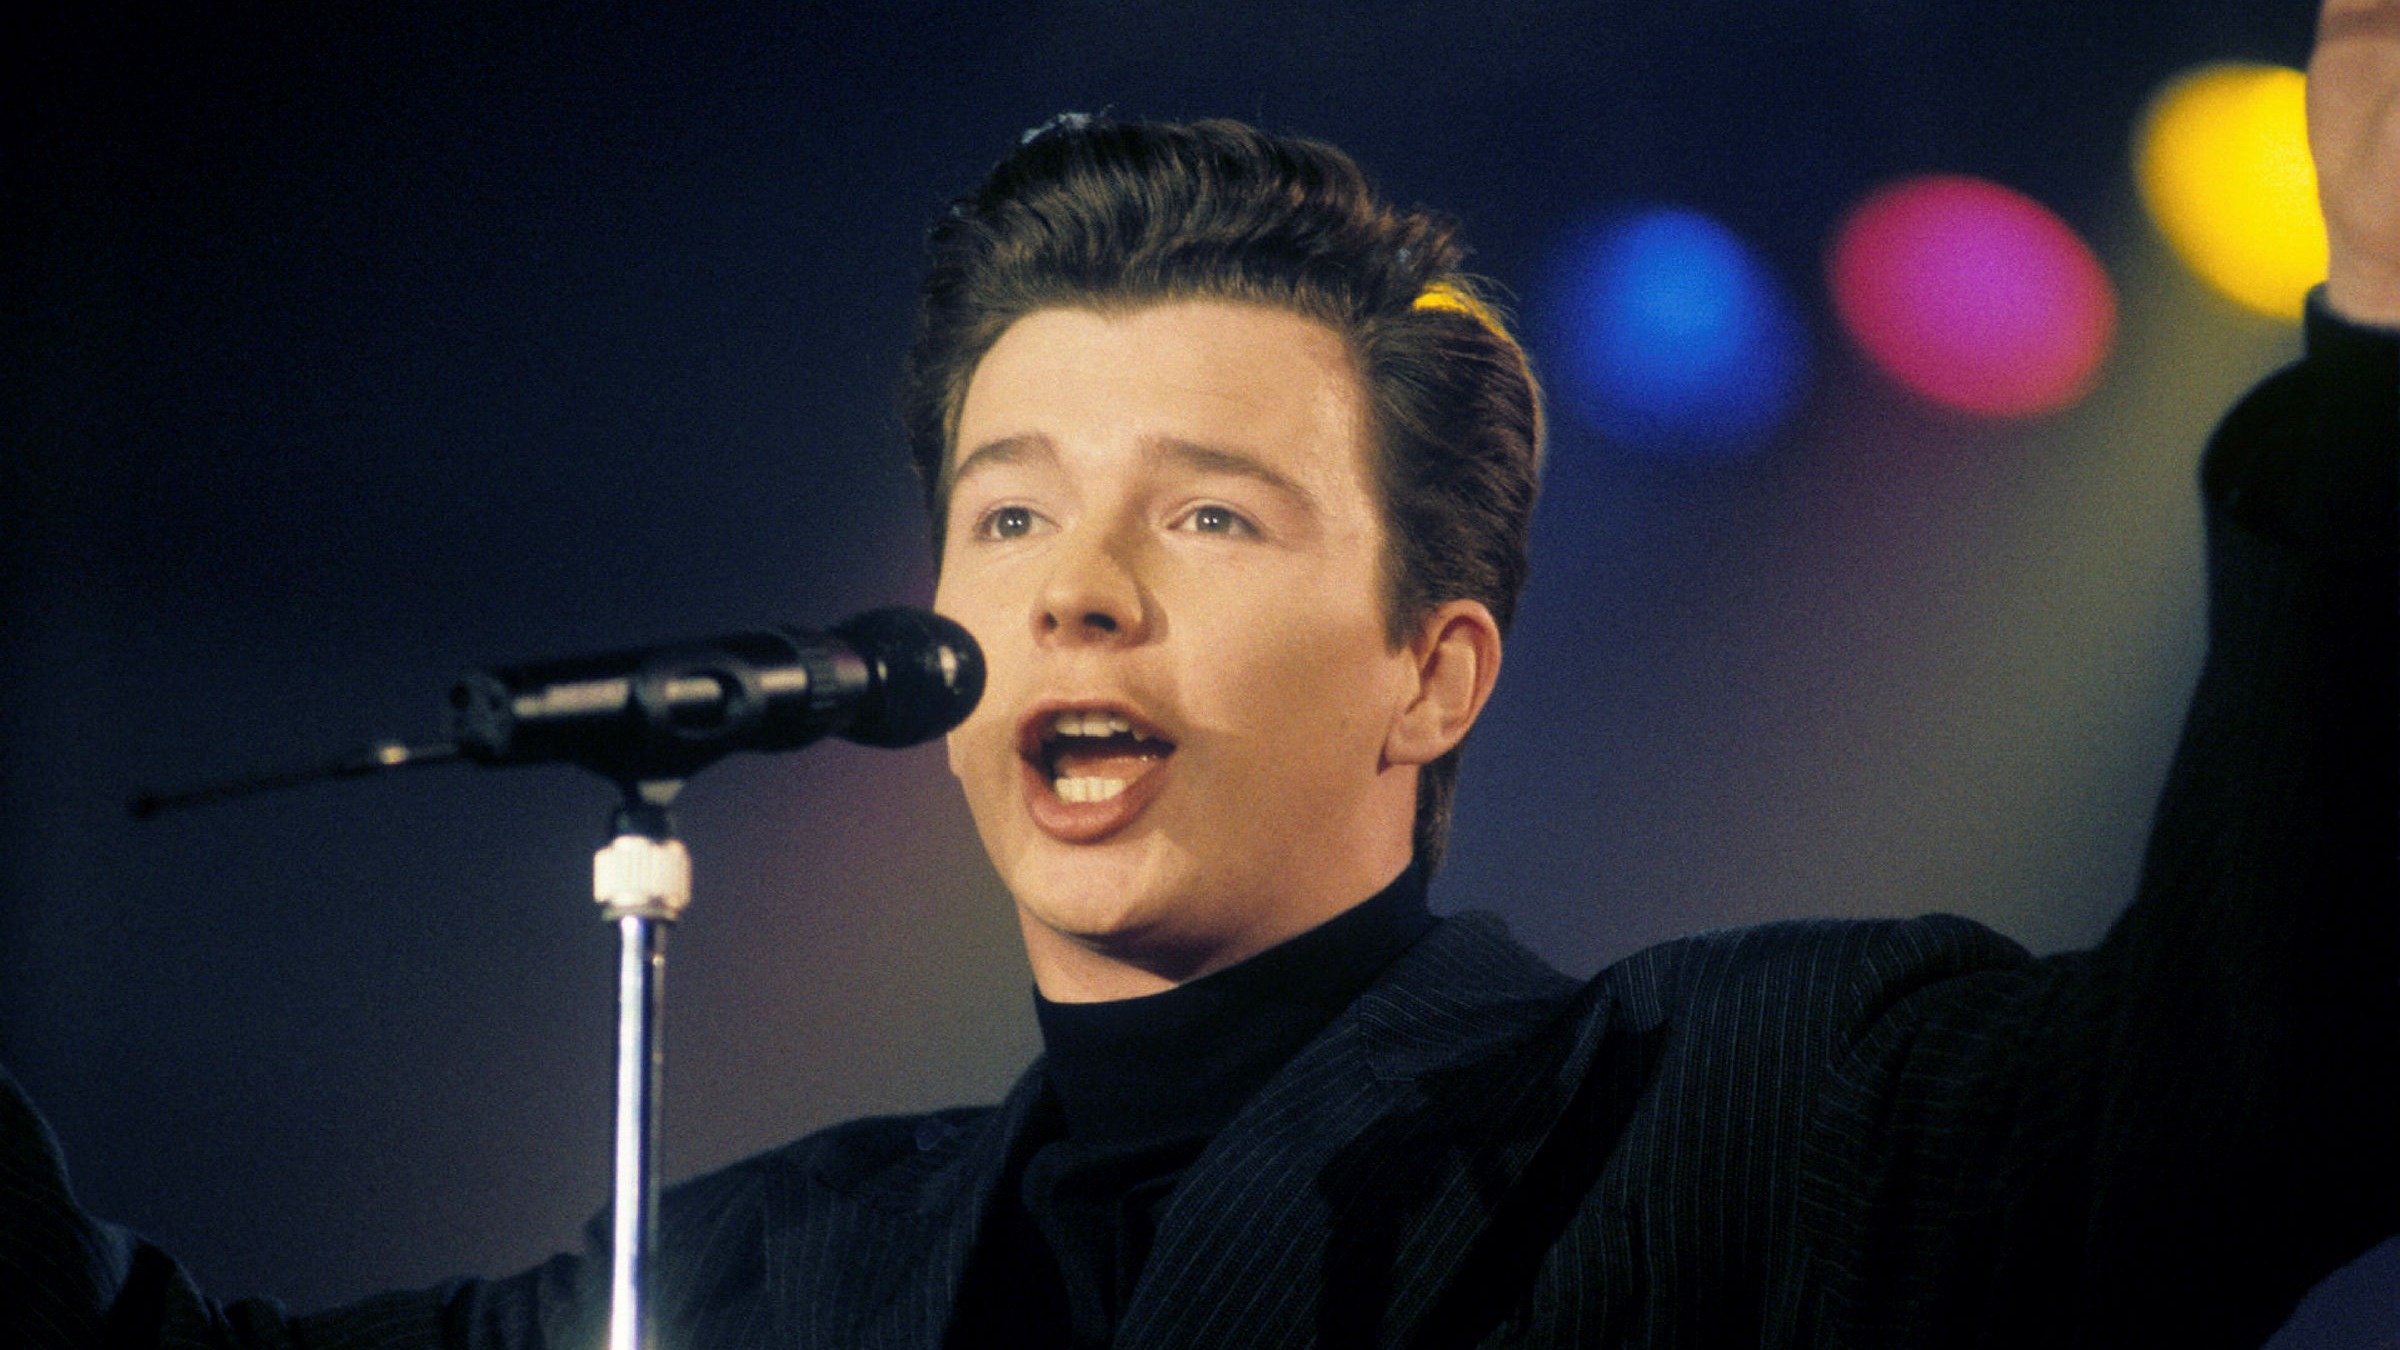 Rick Astley Wallpapers (20+ images inside)